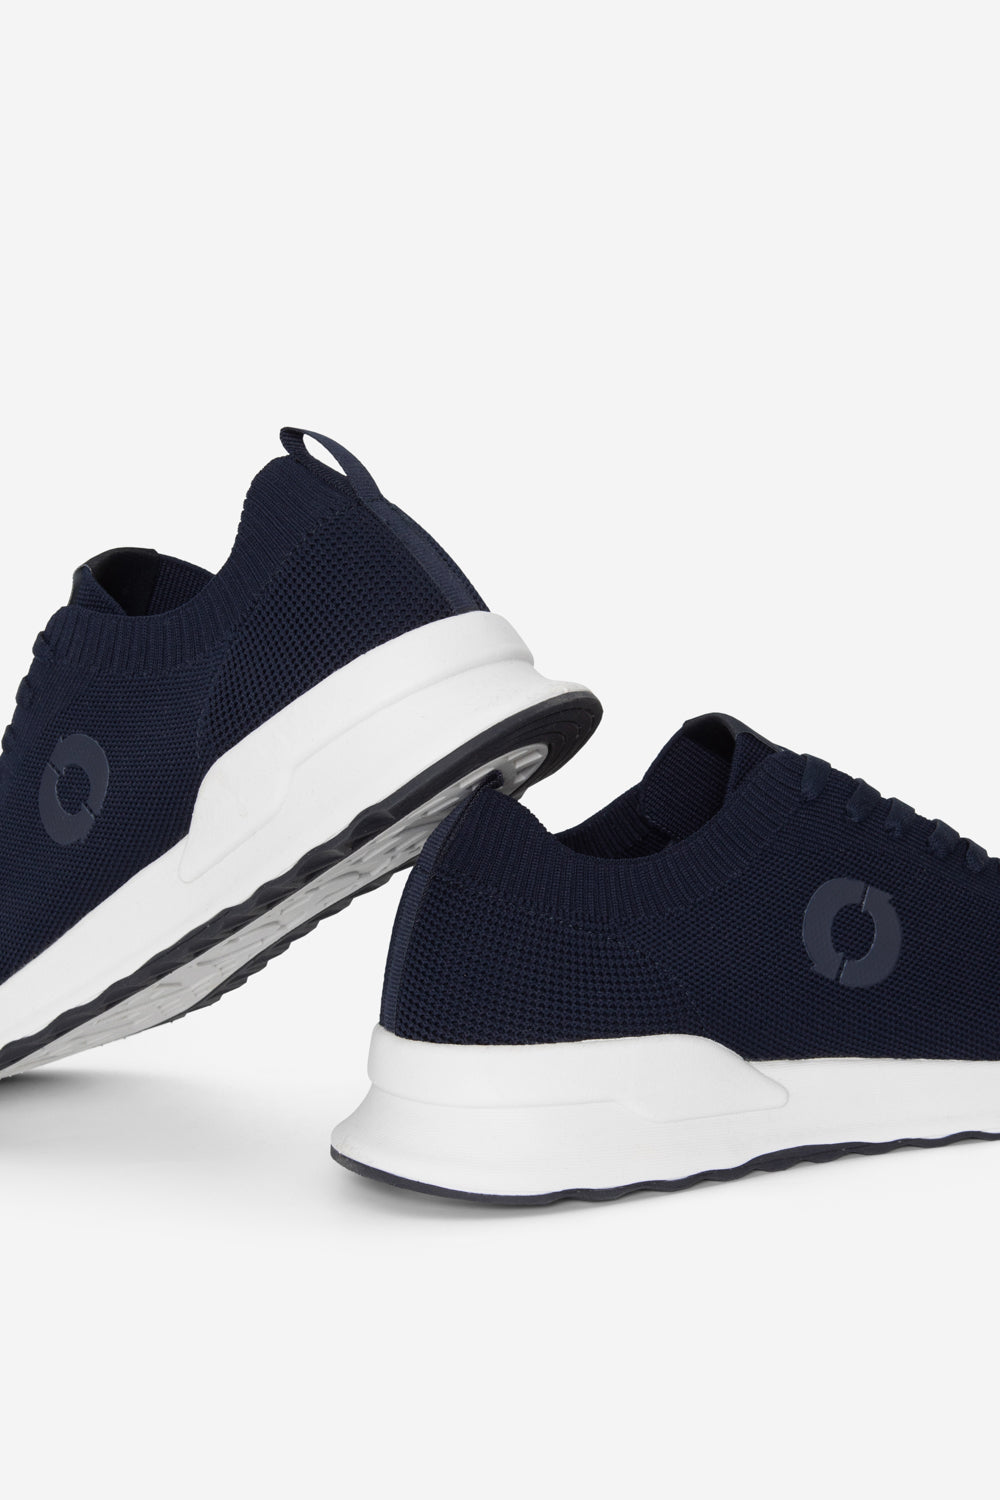 PRINCE KNIT TRAINERS DEEP NAVY